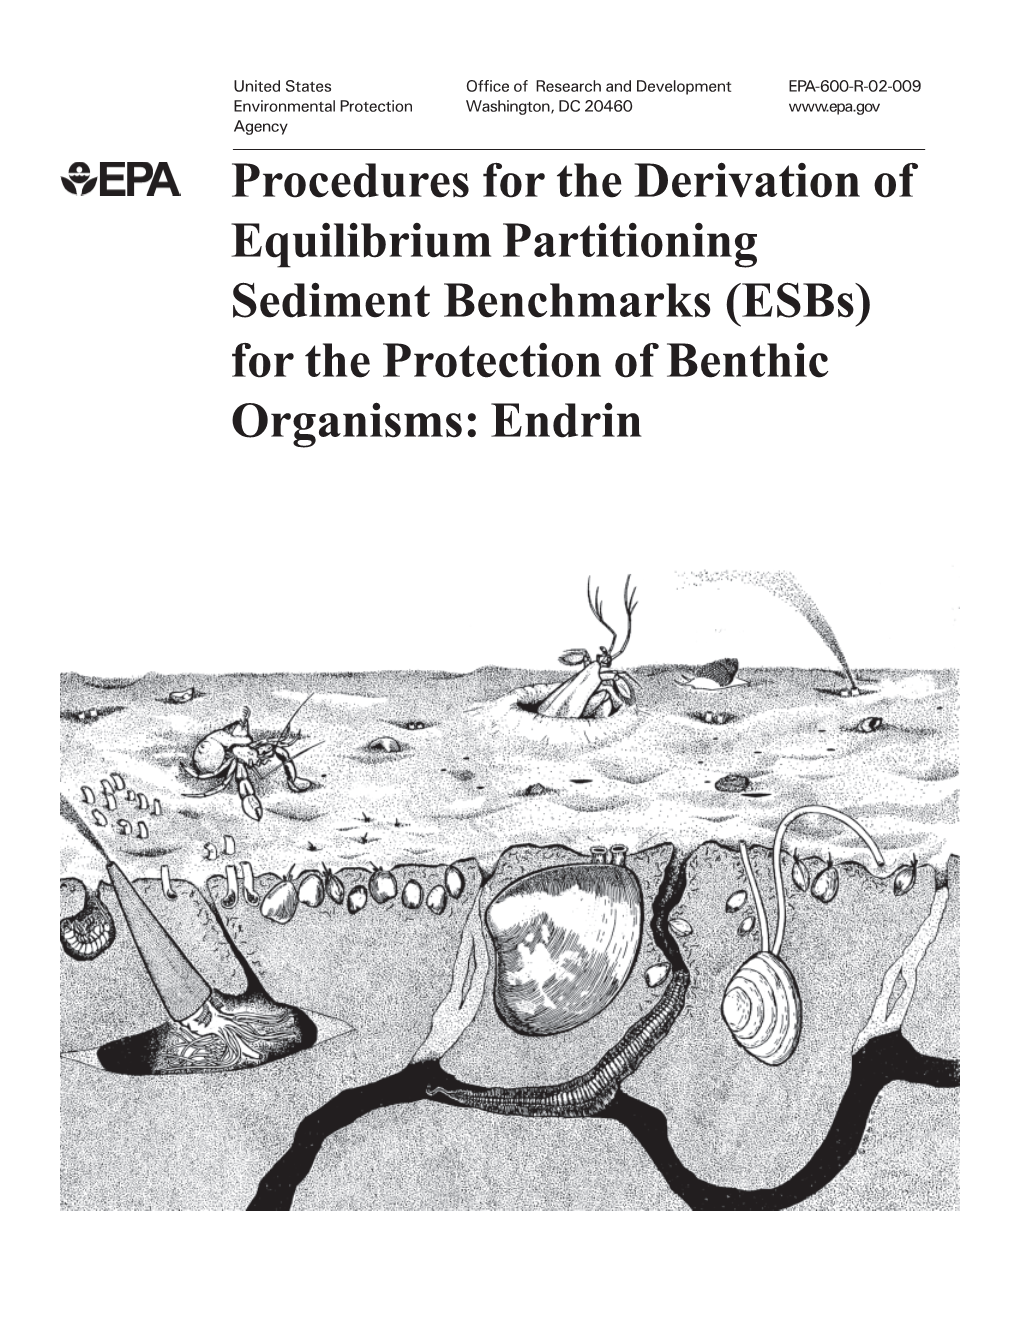 (Esbs) for the Protection of Benthic Organisms: Endrin